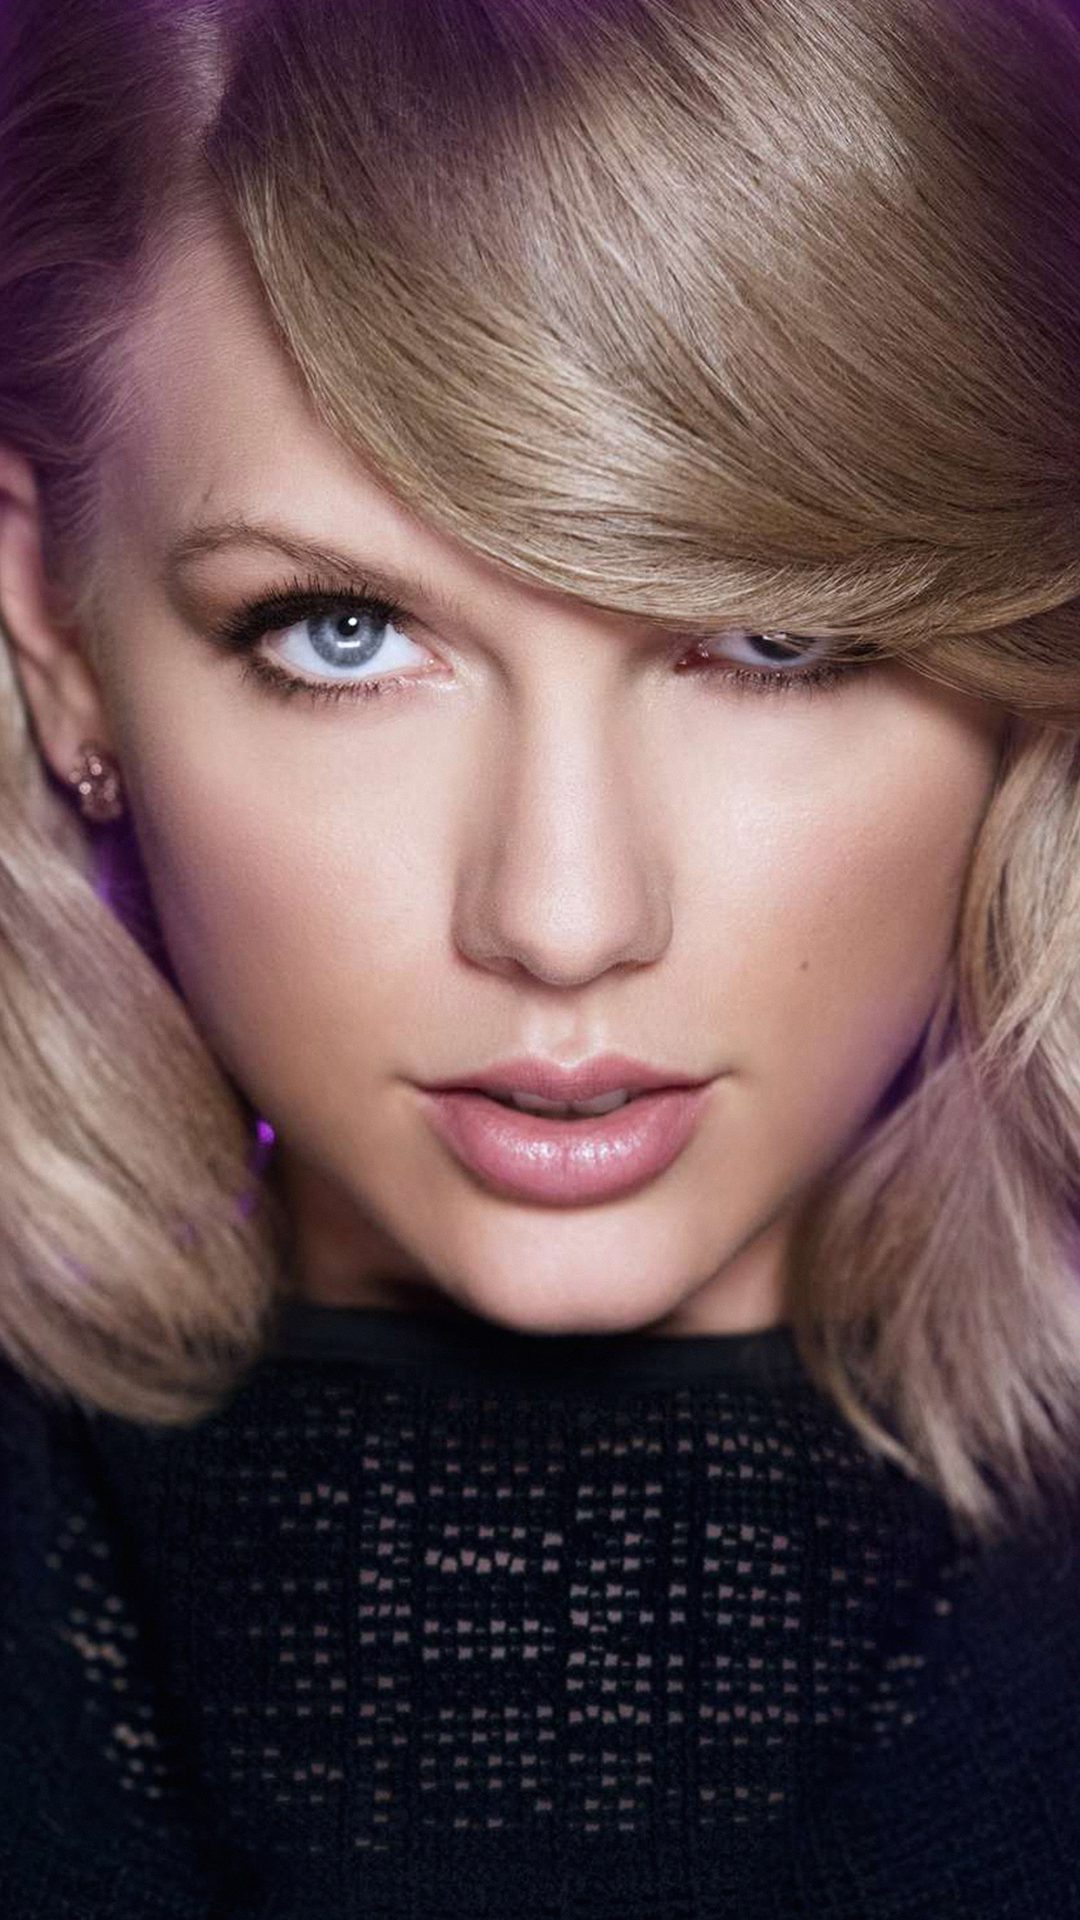 Taylor Swift Face Music Celebrity